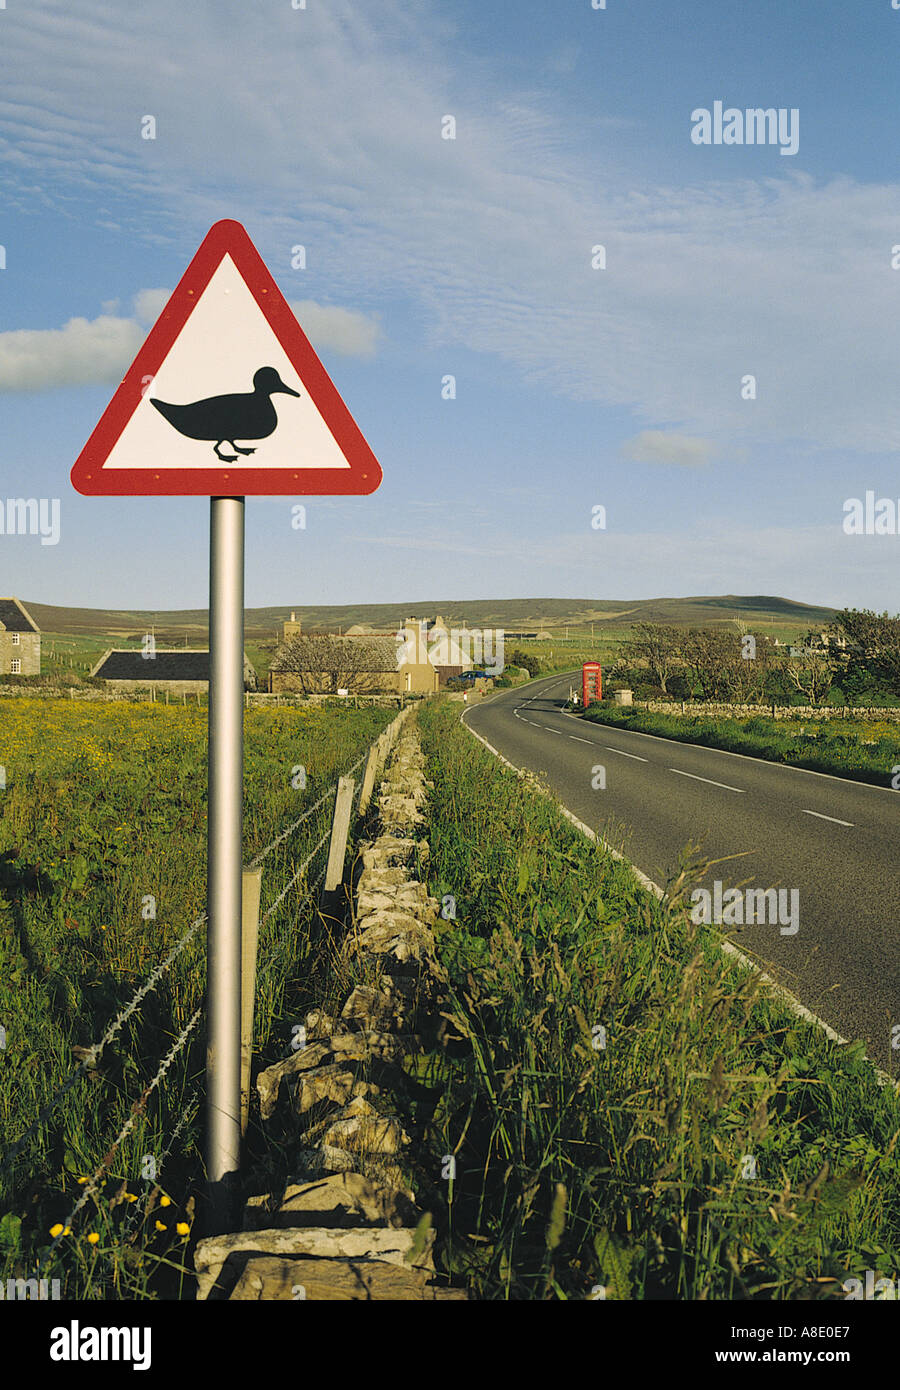 dh Bay of Ireland STENNESS ORKNEY Duck signpost road warning sign wildlife signs roadsign Stock Photo